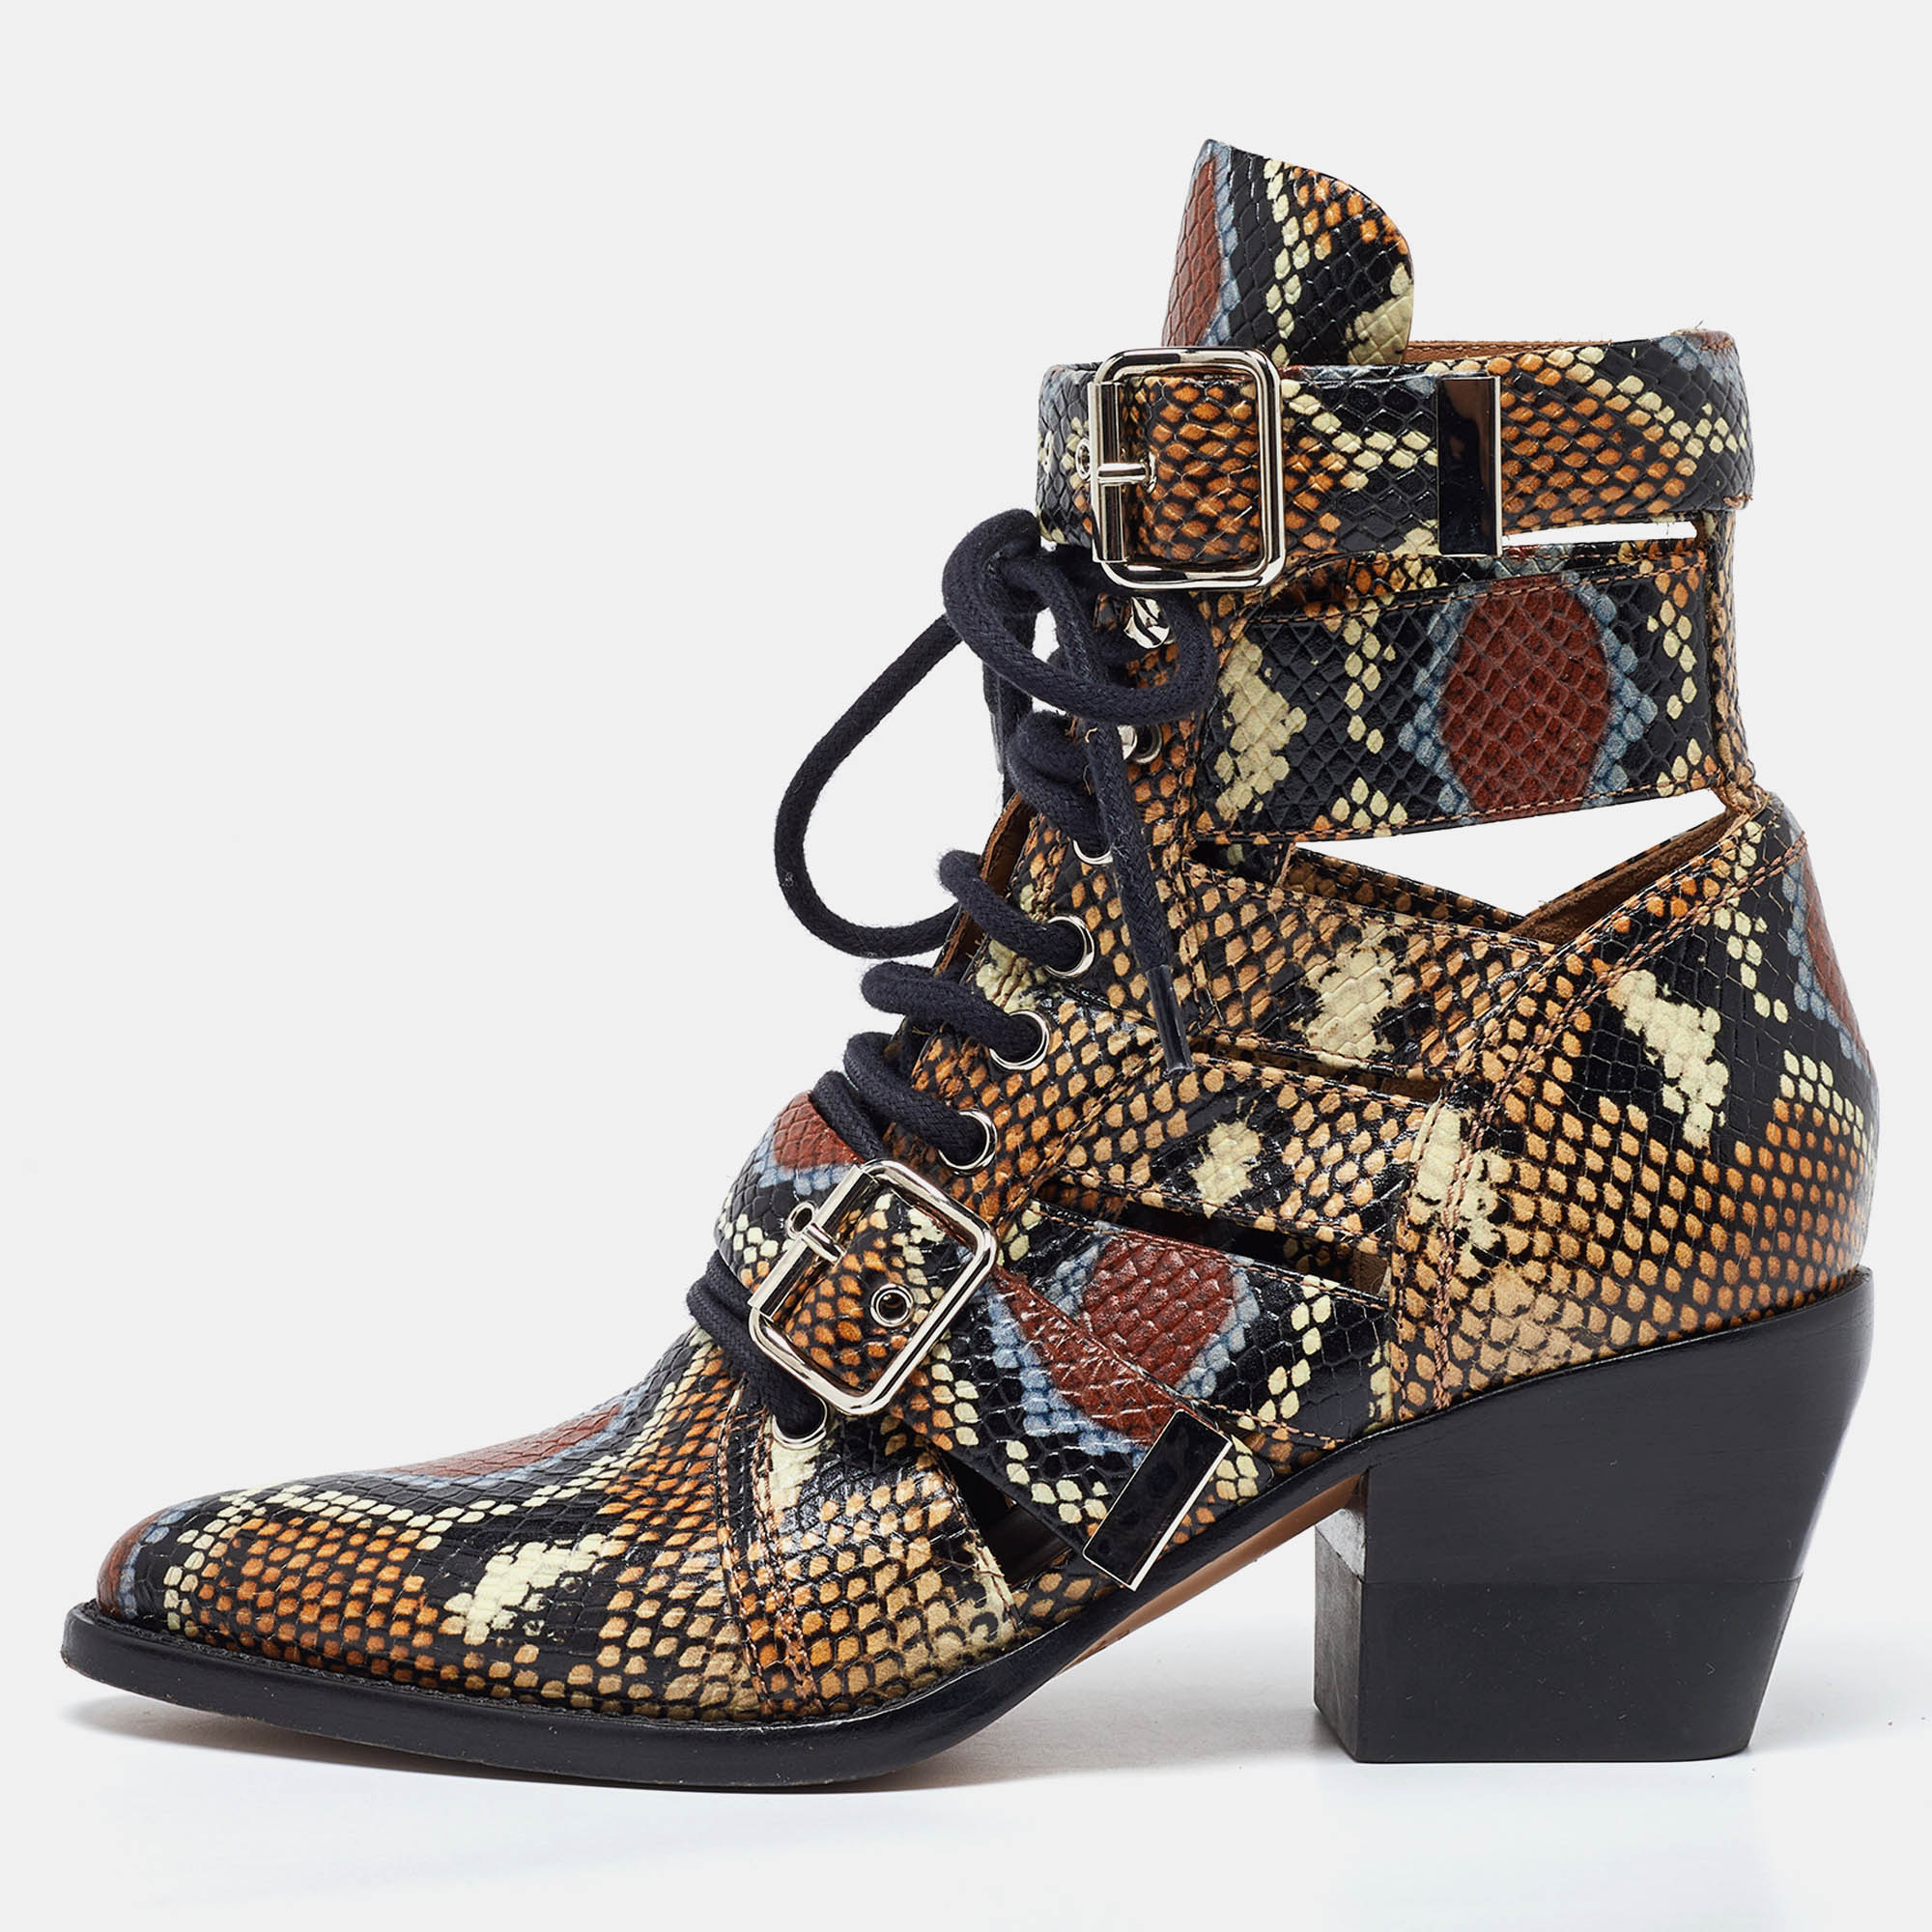 Chloe multicolor python embossed leather rylee cut out buckle detail ankle boots size 37.5